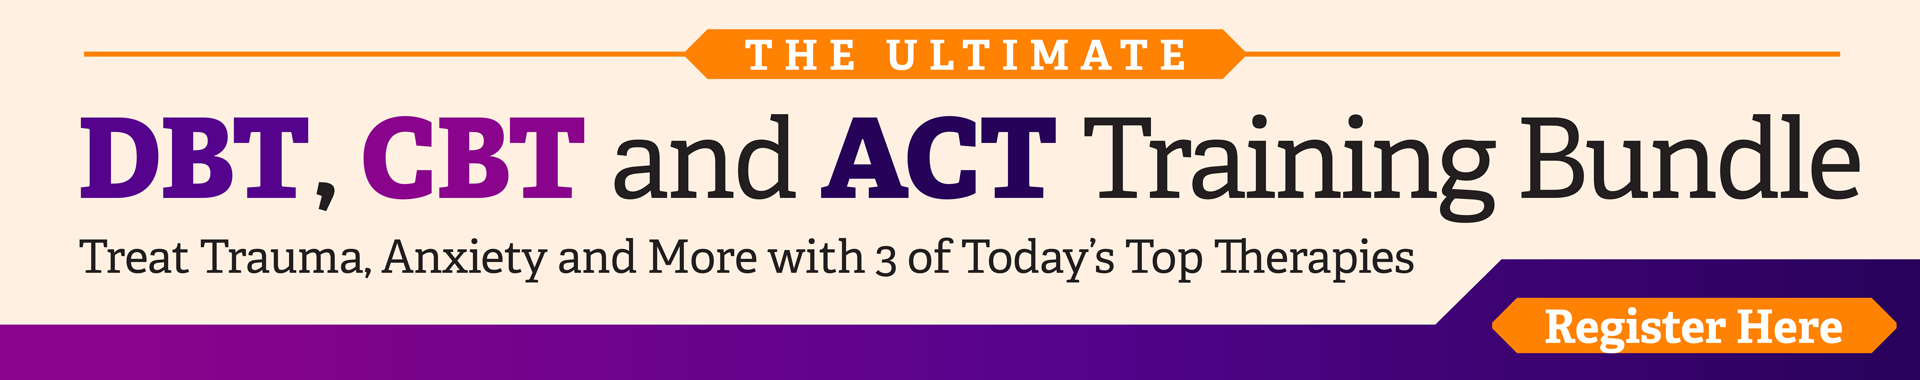 The Ultimate DBT, CBT, and ACT Training Bundle